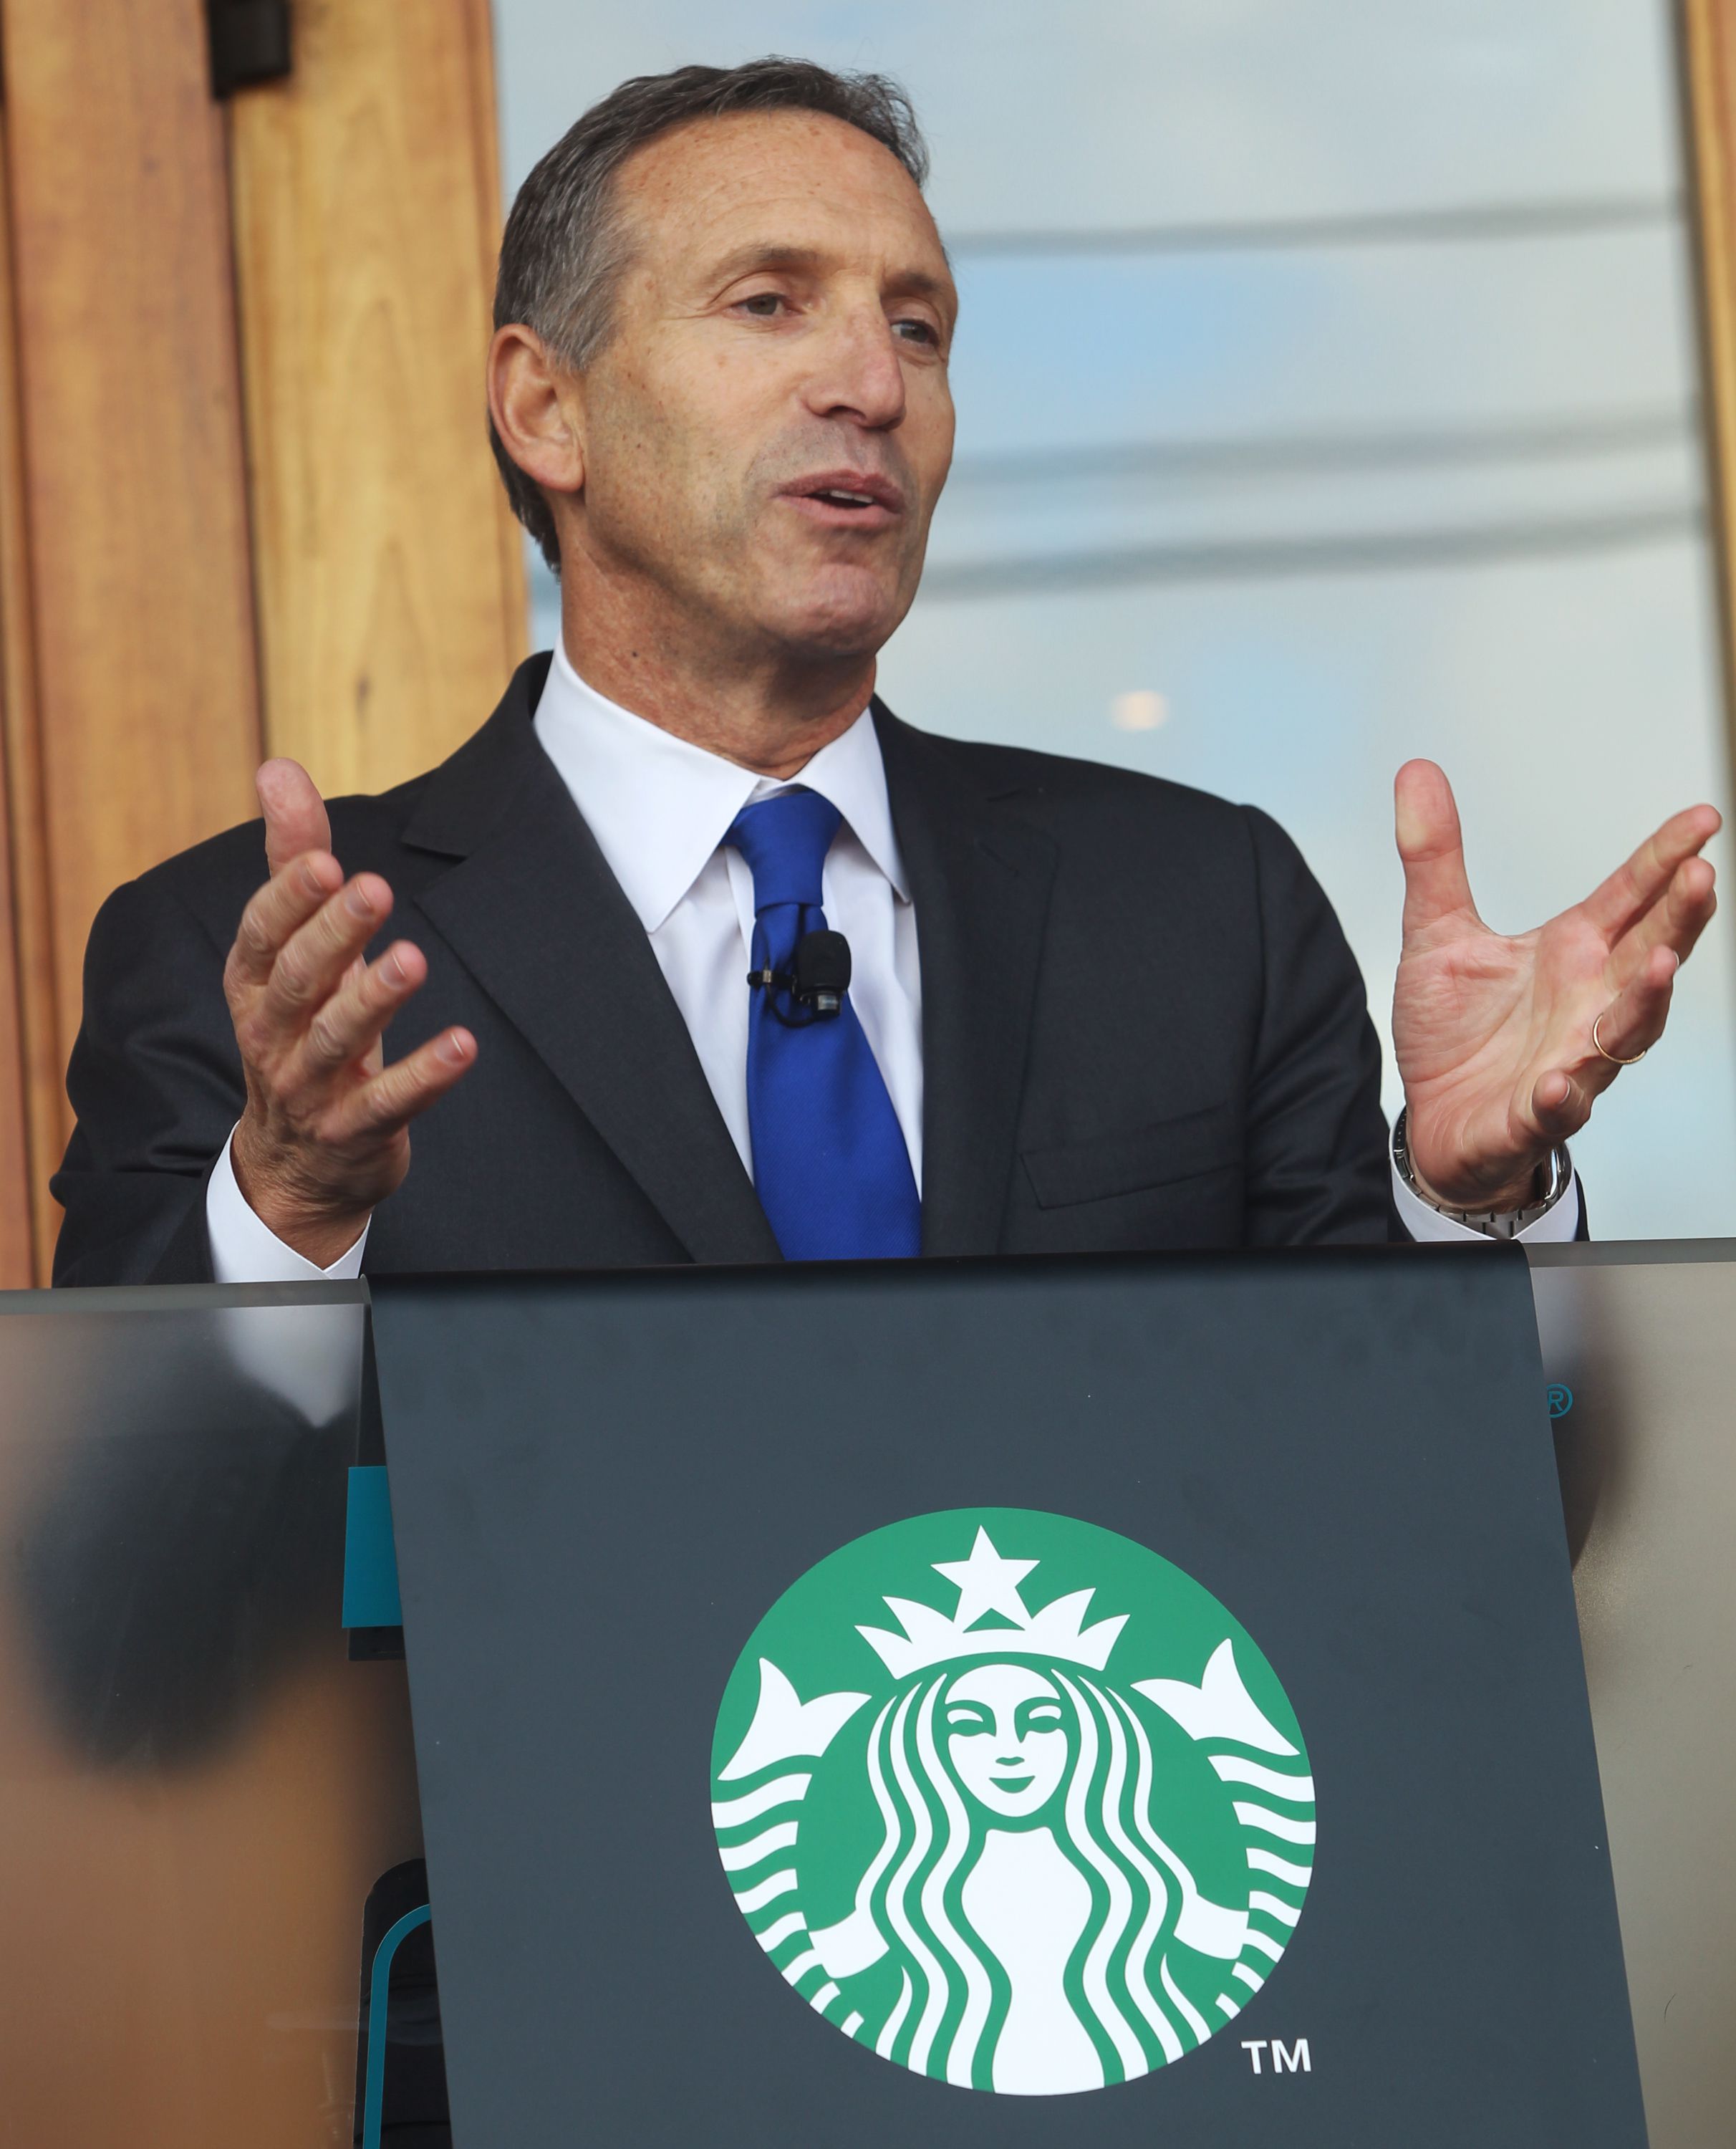 Quotes From Starbucks Founder Howard Schultz